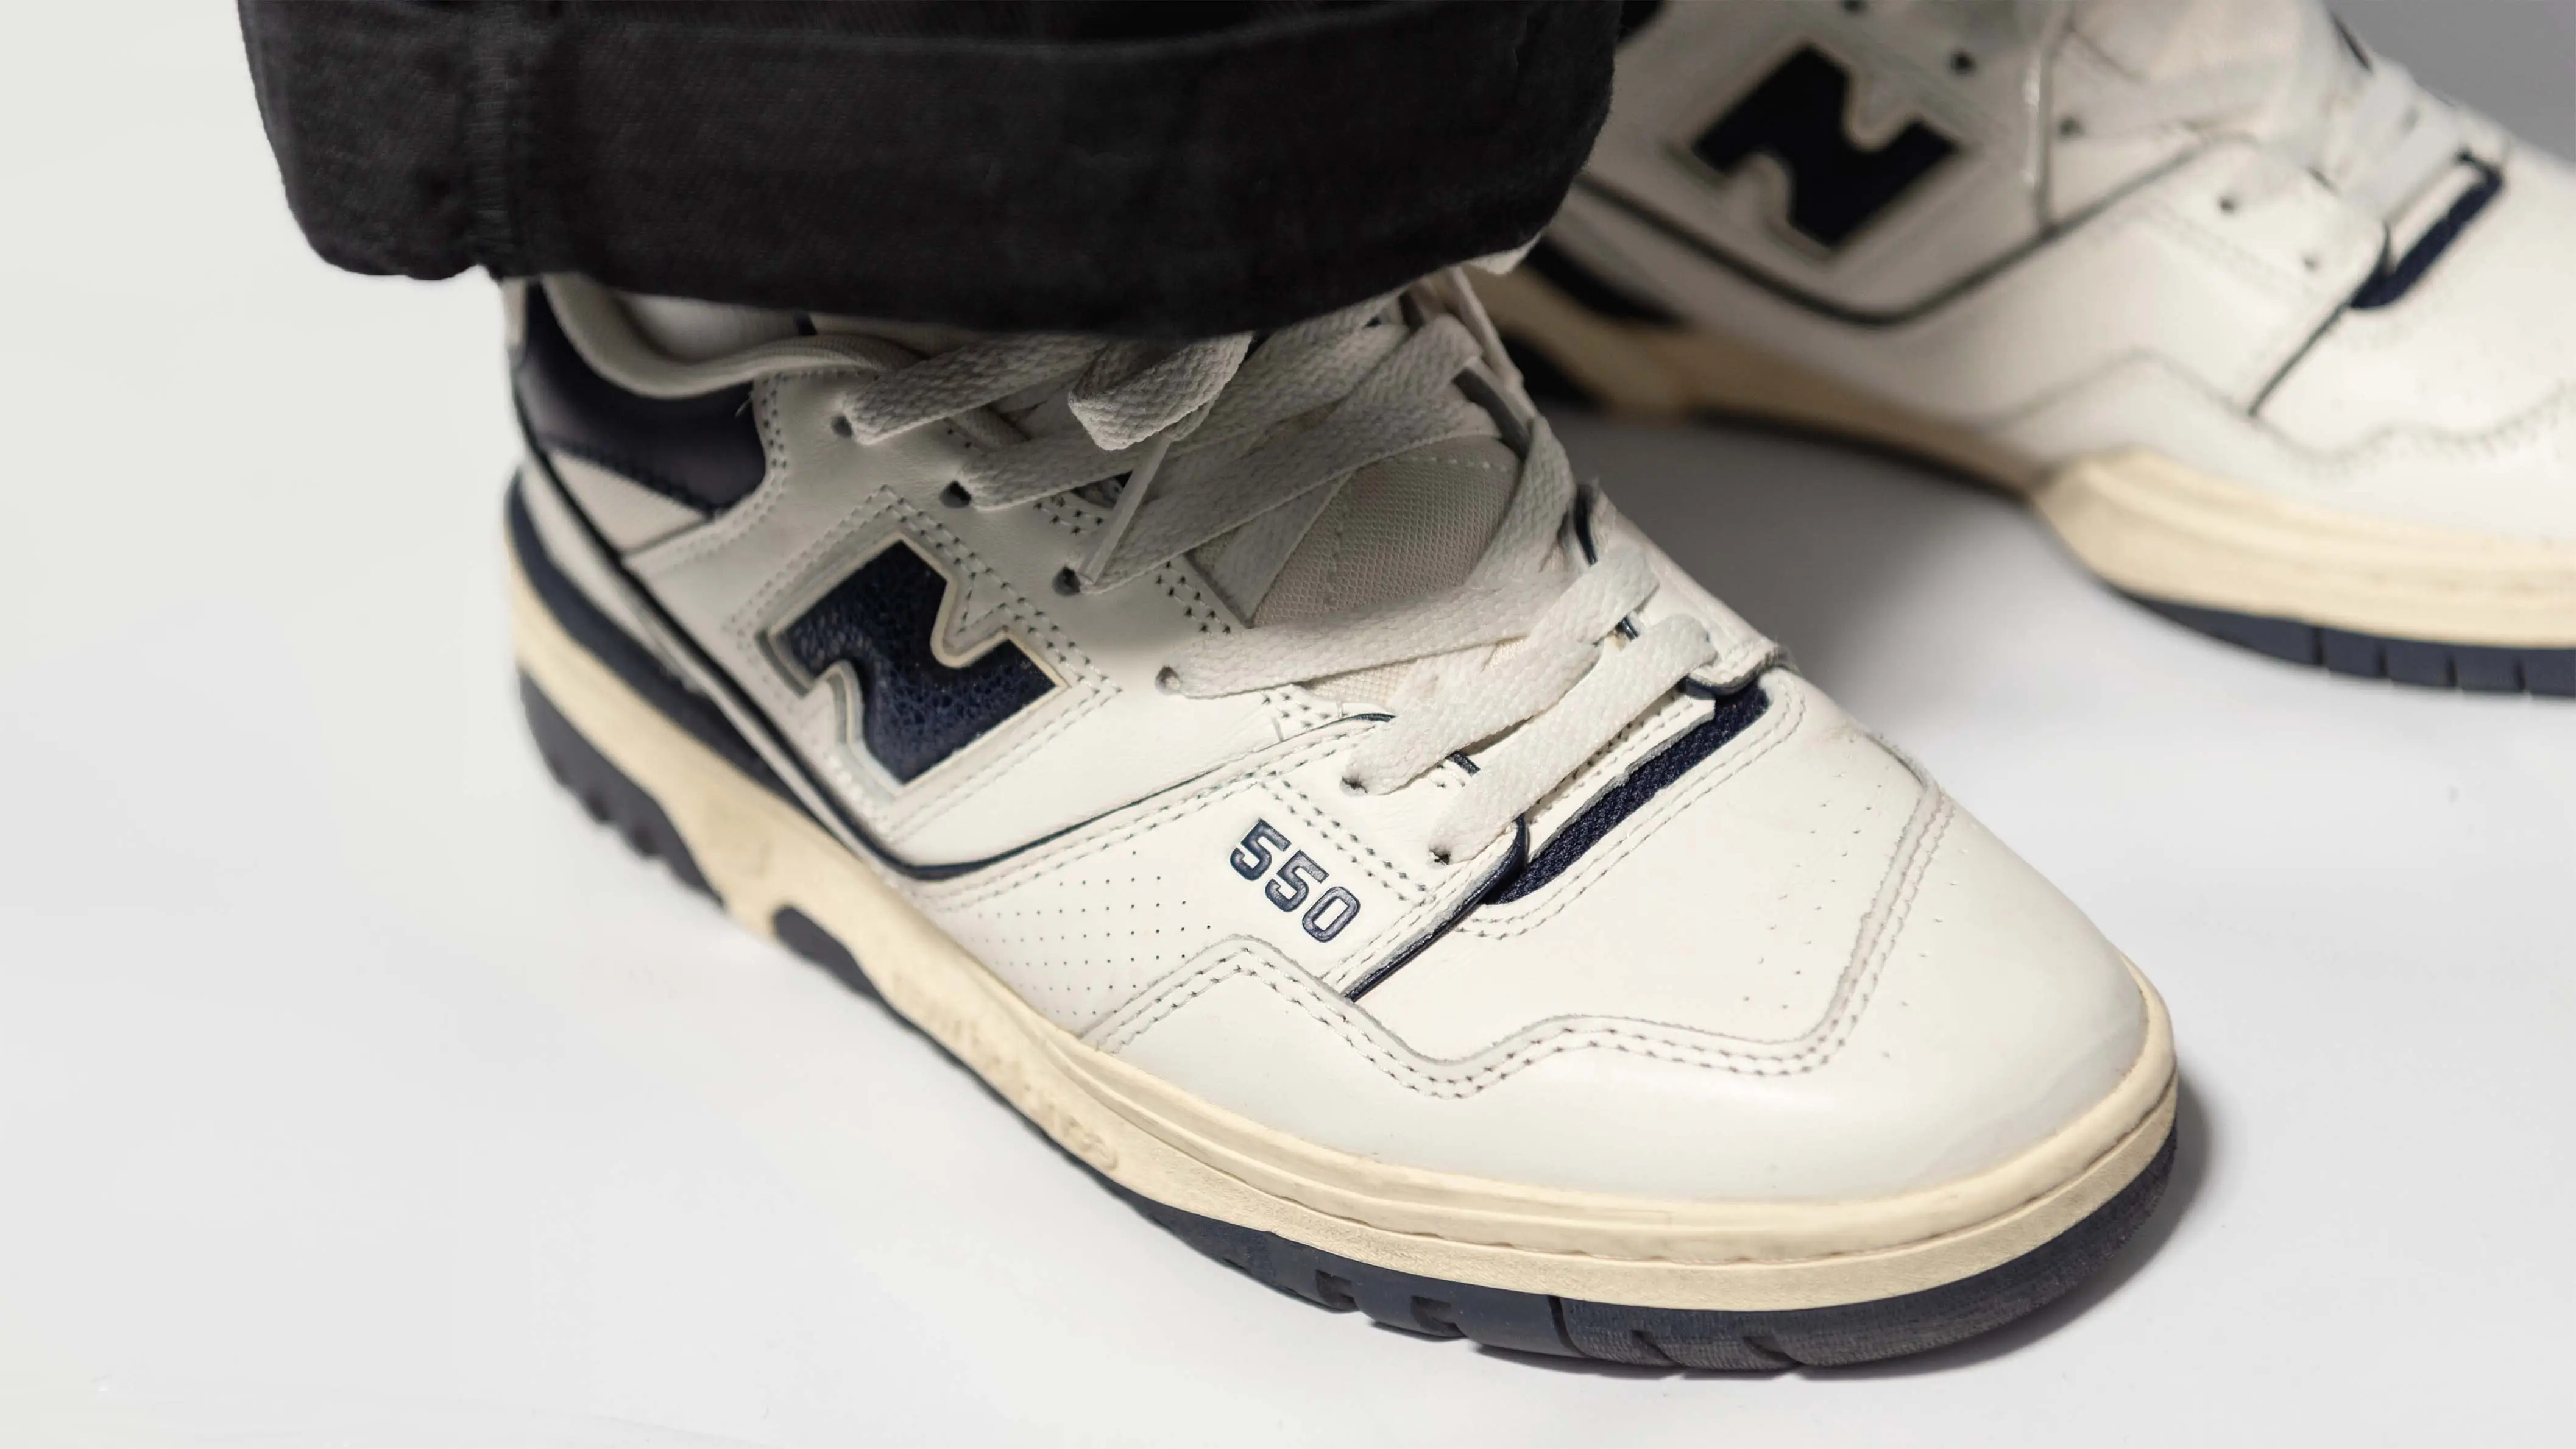 New Balance 550 Sizing: How Do They Fit?